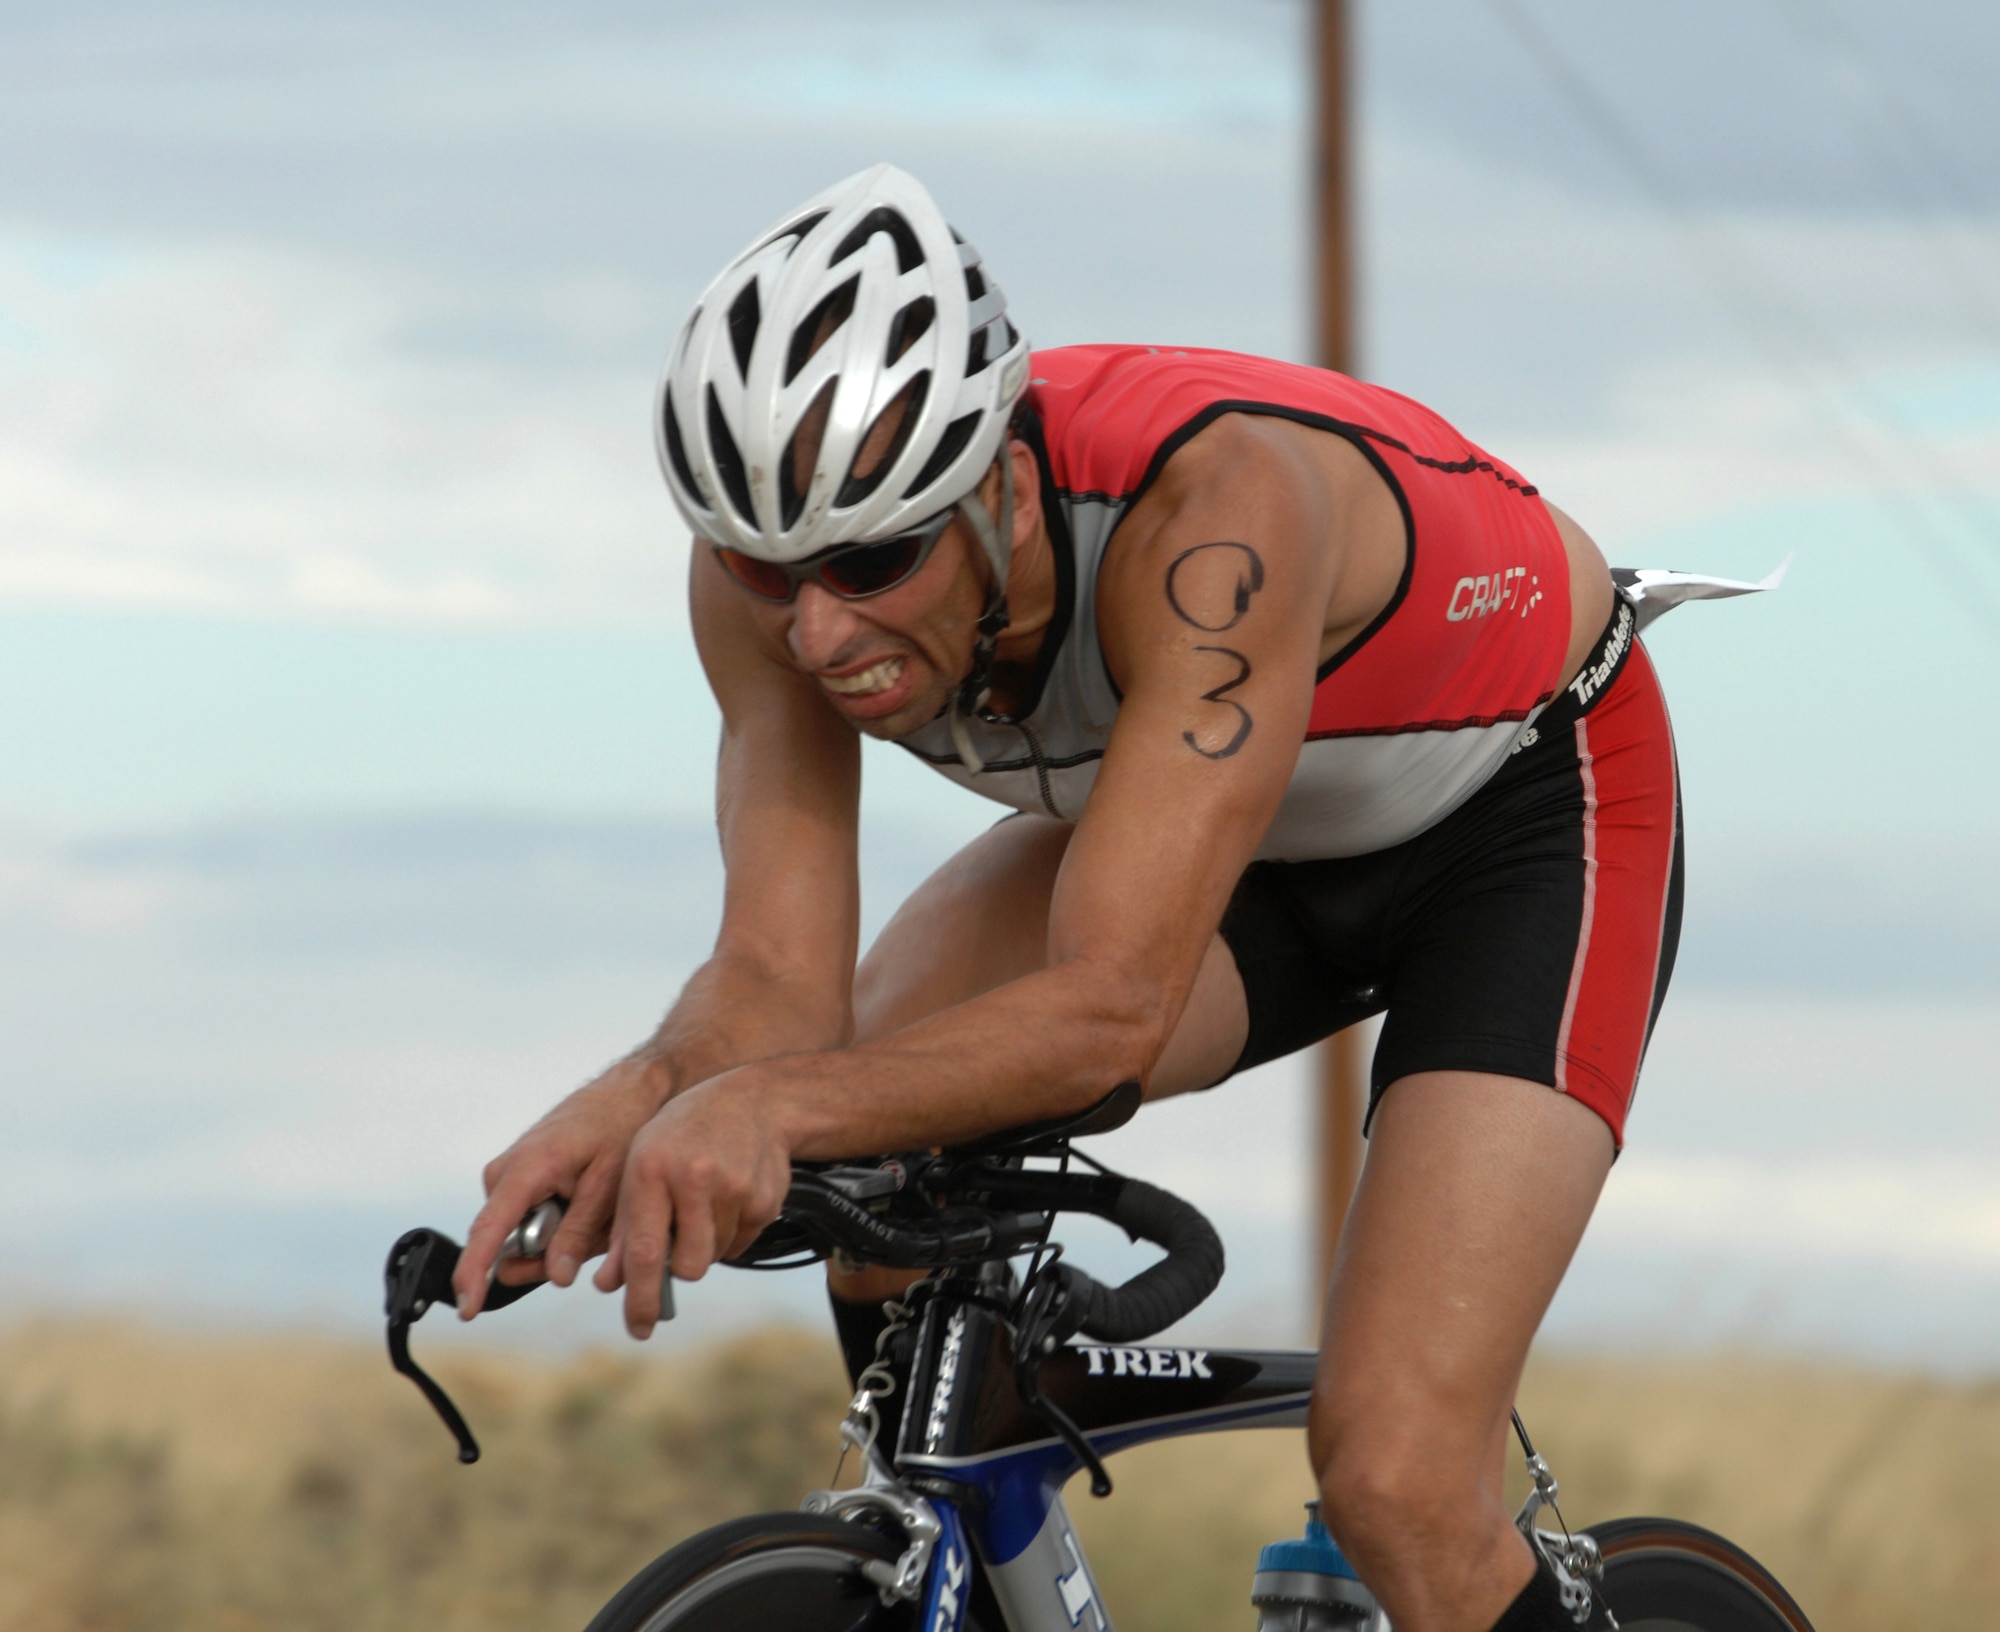 Bobby Gonzales, a tri-athlete from El Paso, Texas, rides his bike in the 30K ride during the annual Triathlon at Holloman Air Force Base, N.M., October 12. Mr. Gonzales won the overall Triathlon with a time of one hour and 26 seconds.  (U.S. Air Force photo/Airman Sondra M. Escutia)